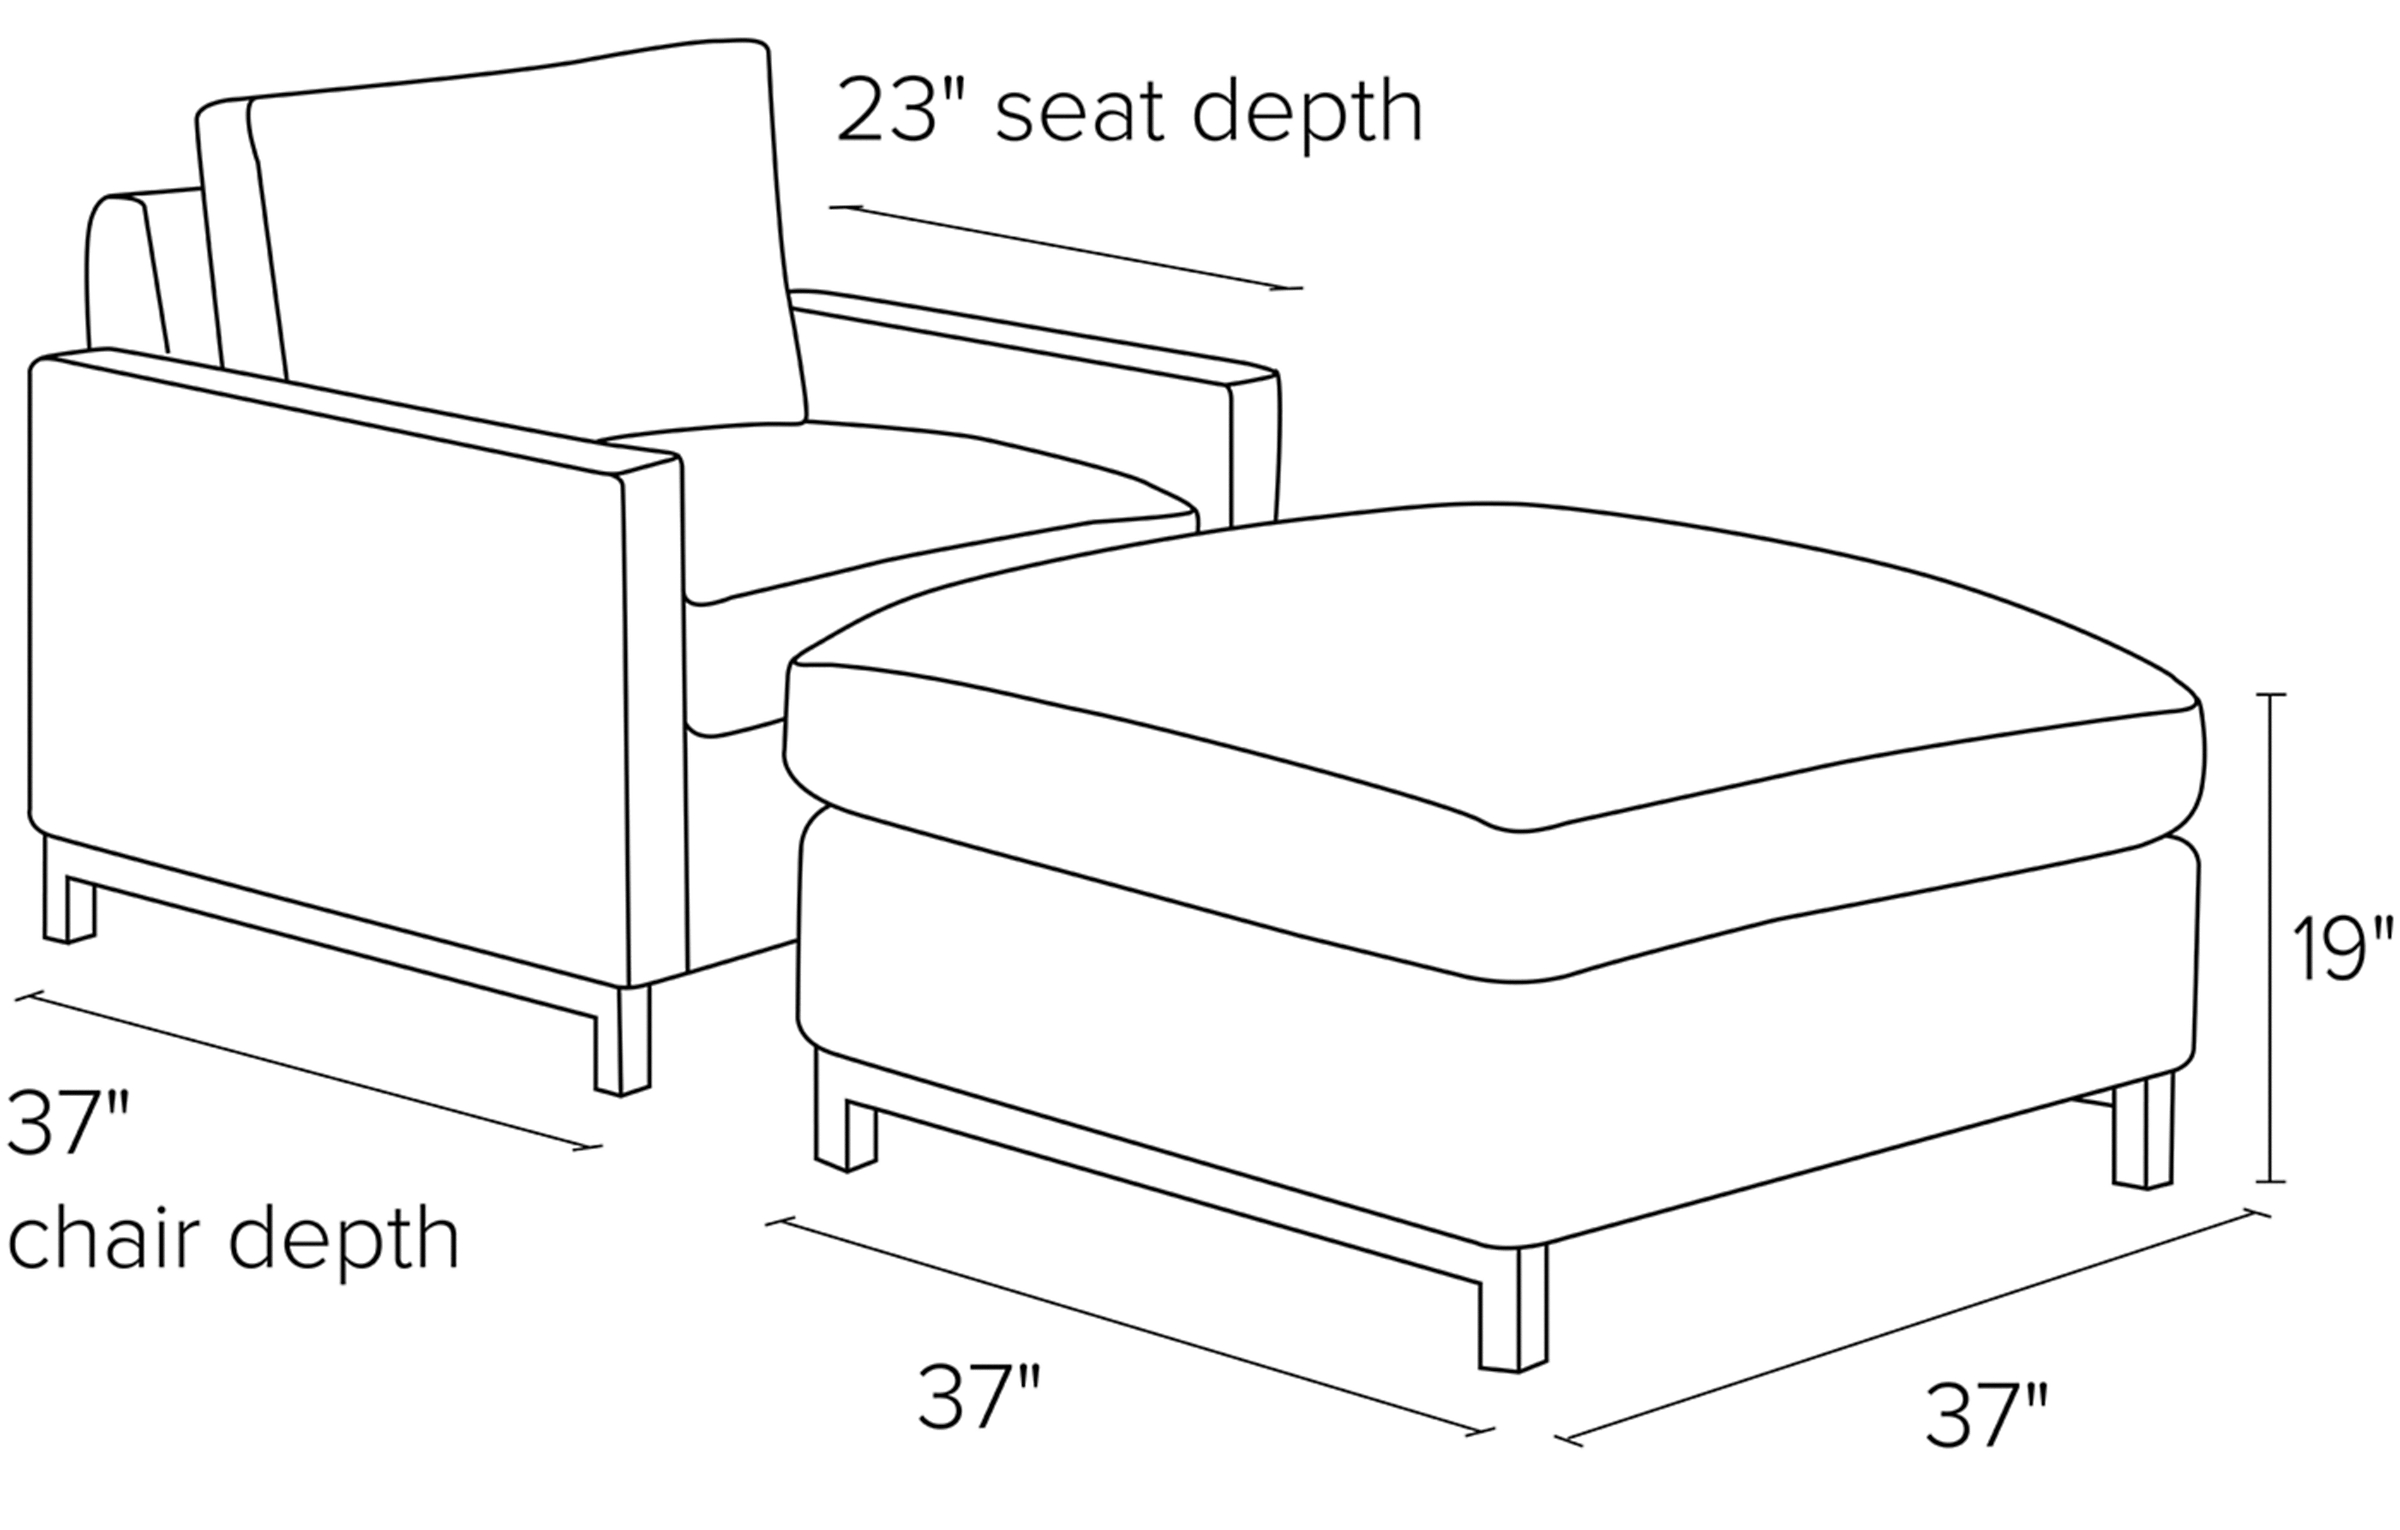 Side view dimension illustration of Stevens chair and ottoman.